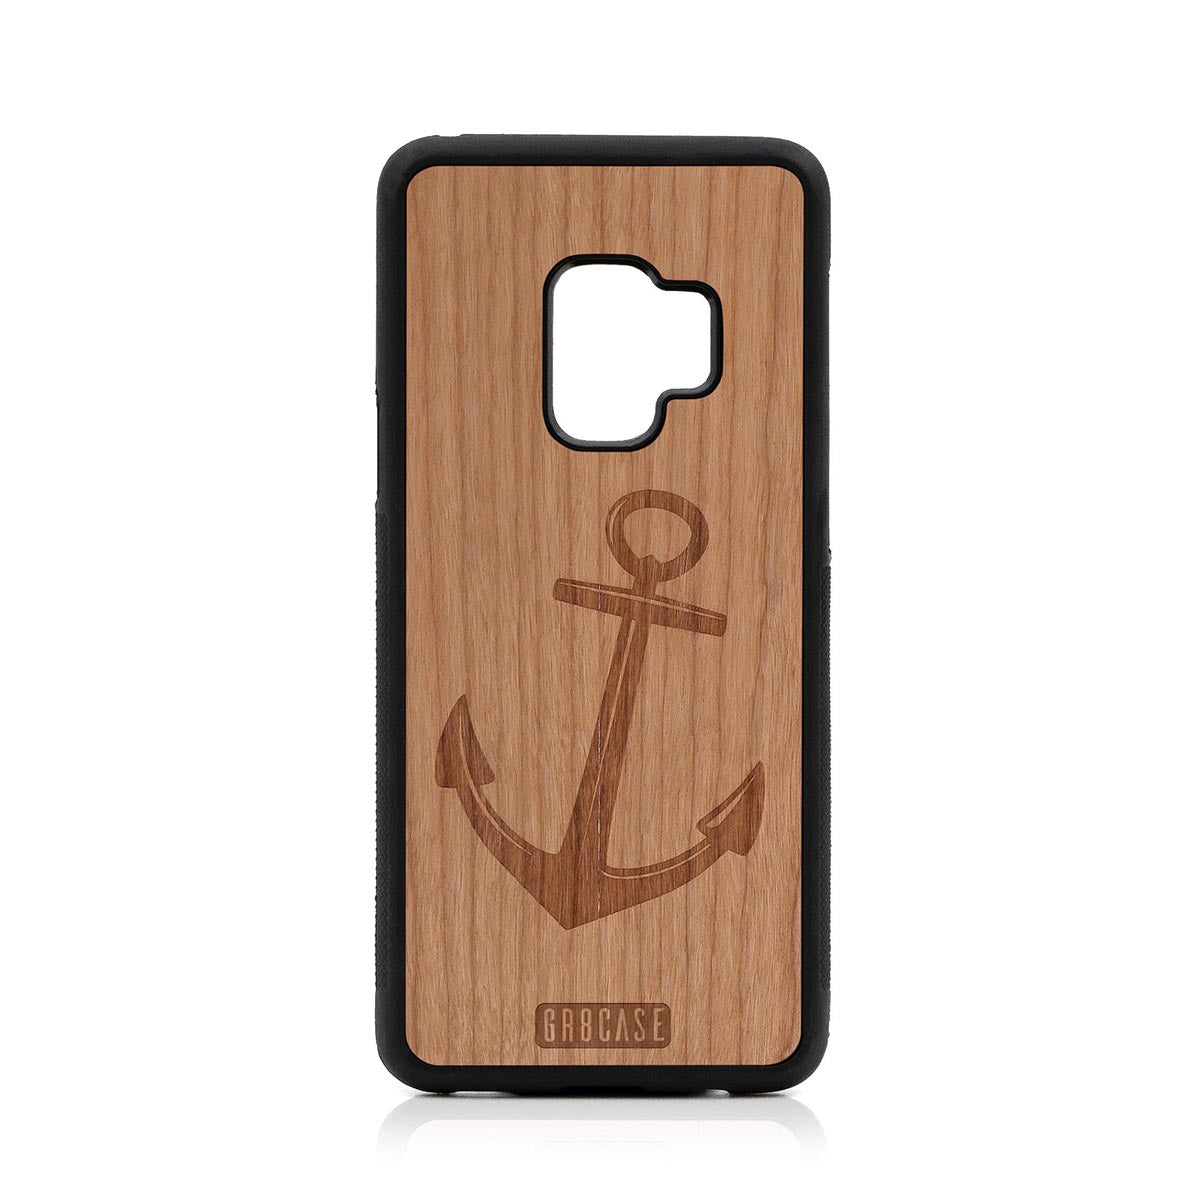 Anchor Design Wood Case For Samsung Galaxy S9 by GR8CASE